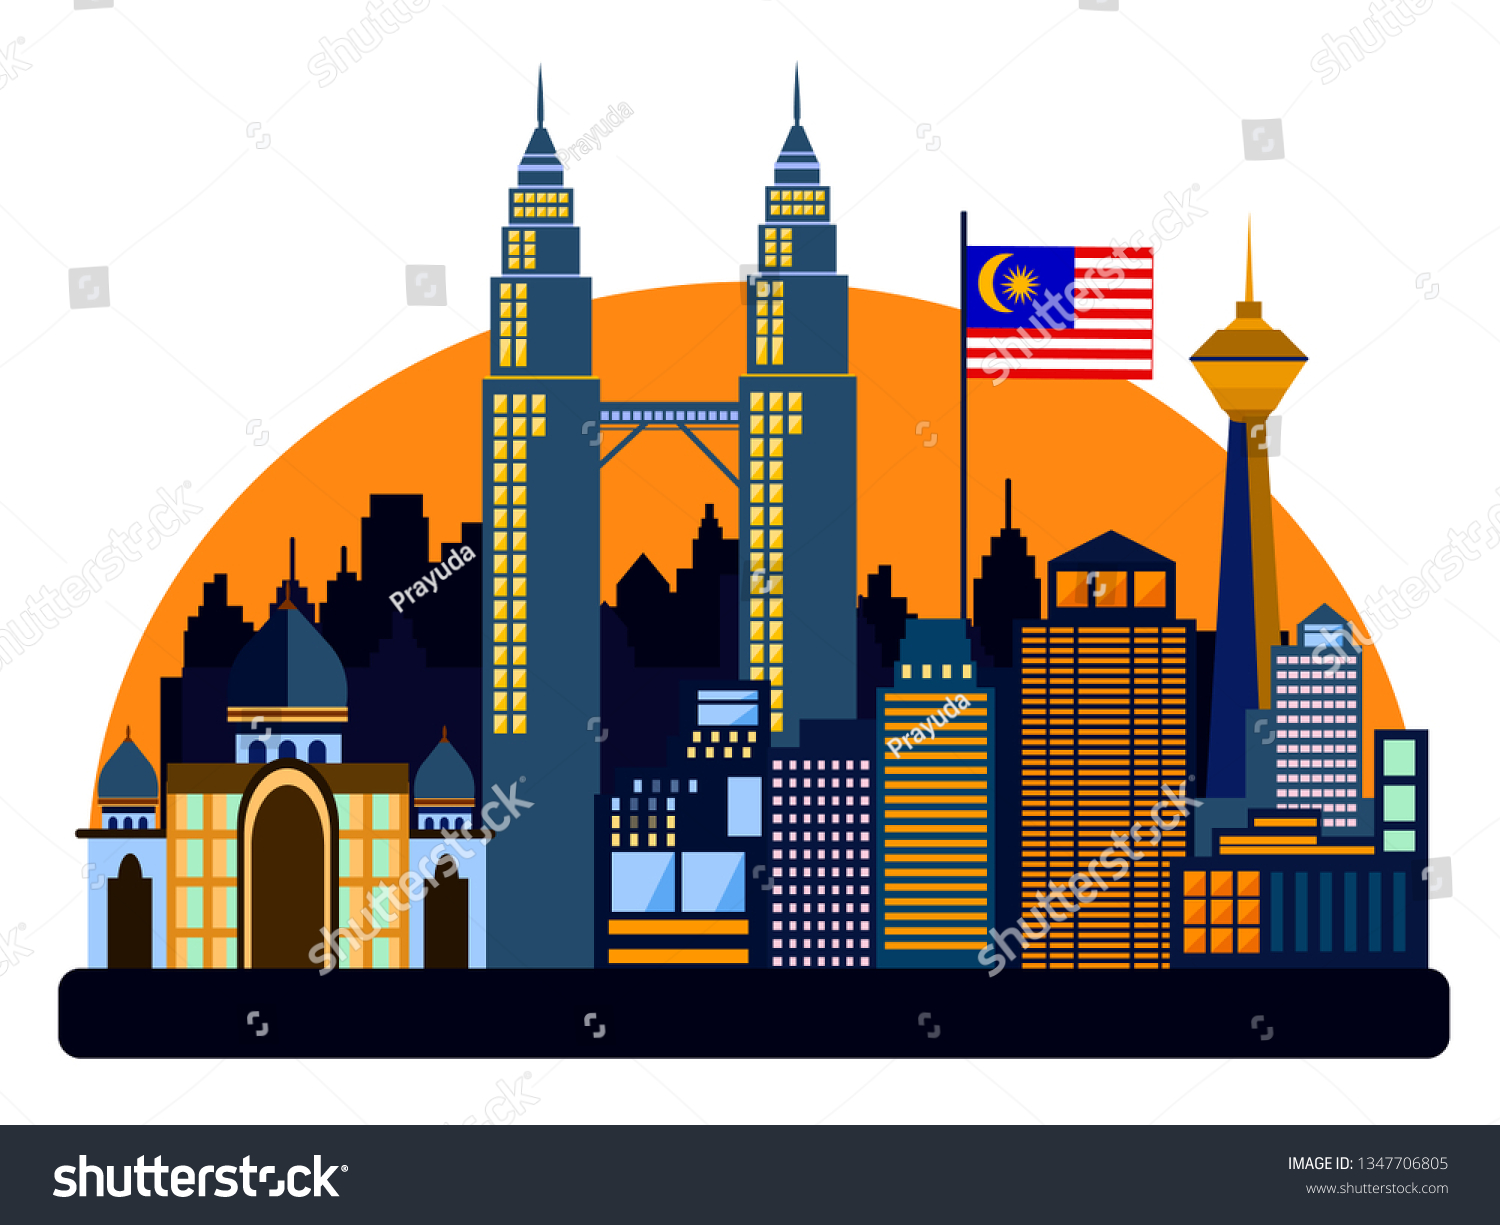 Malaysia Country Design Illustration Template World Stock Vector Royalty Free 1347706805